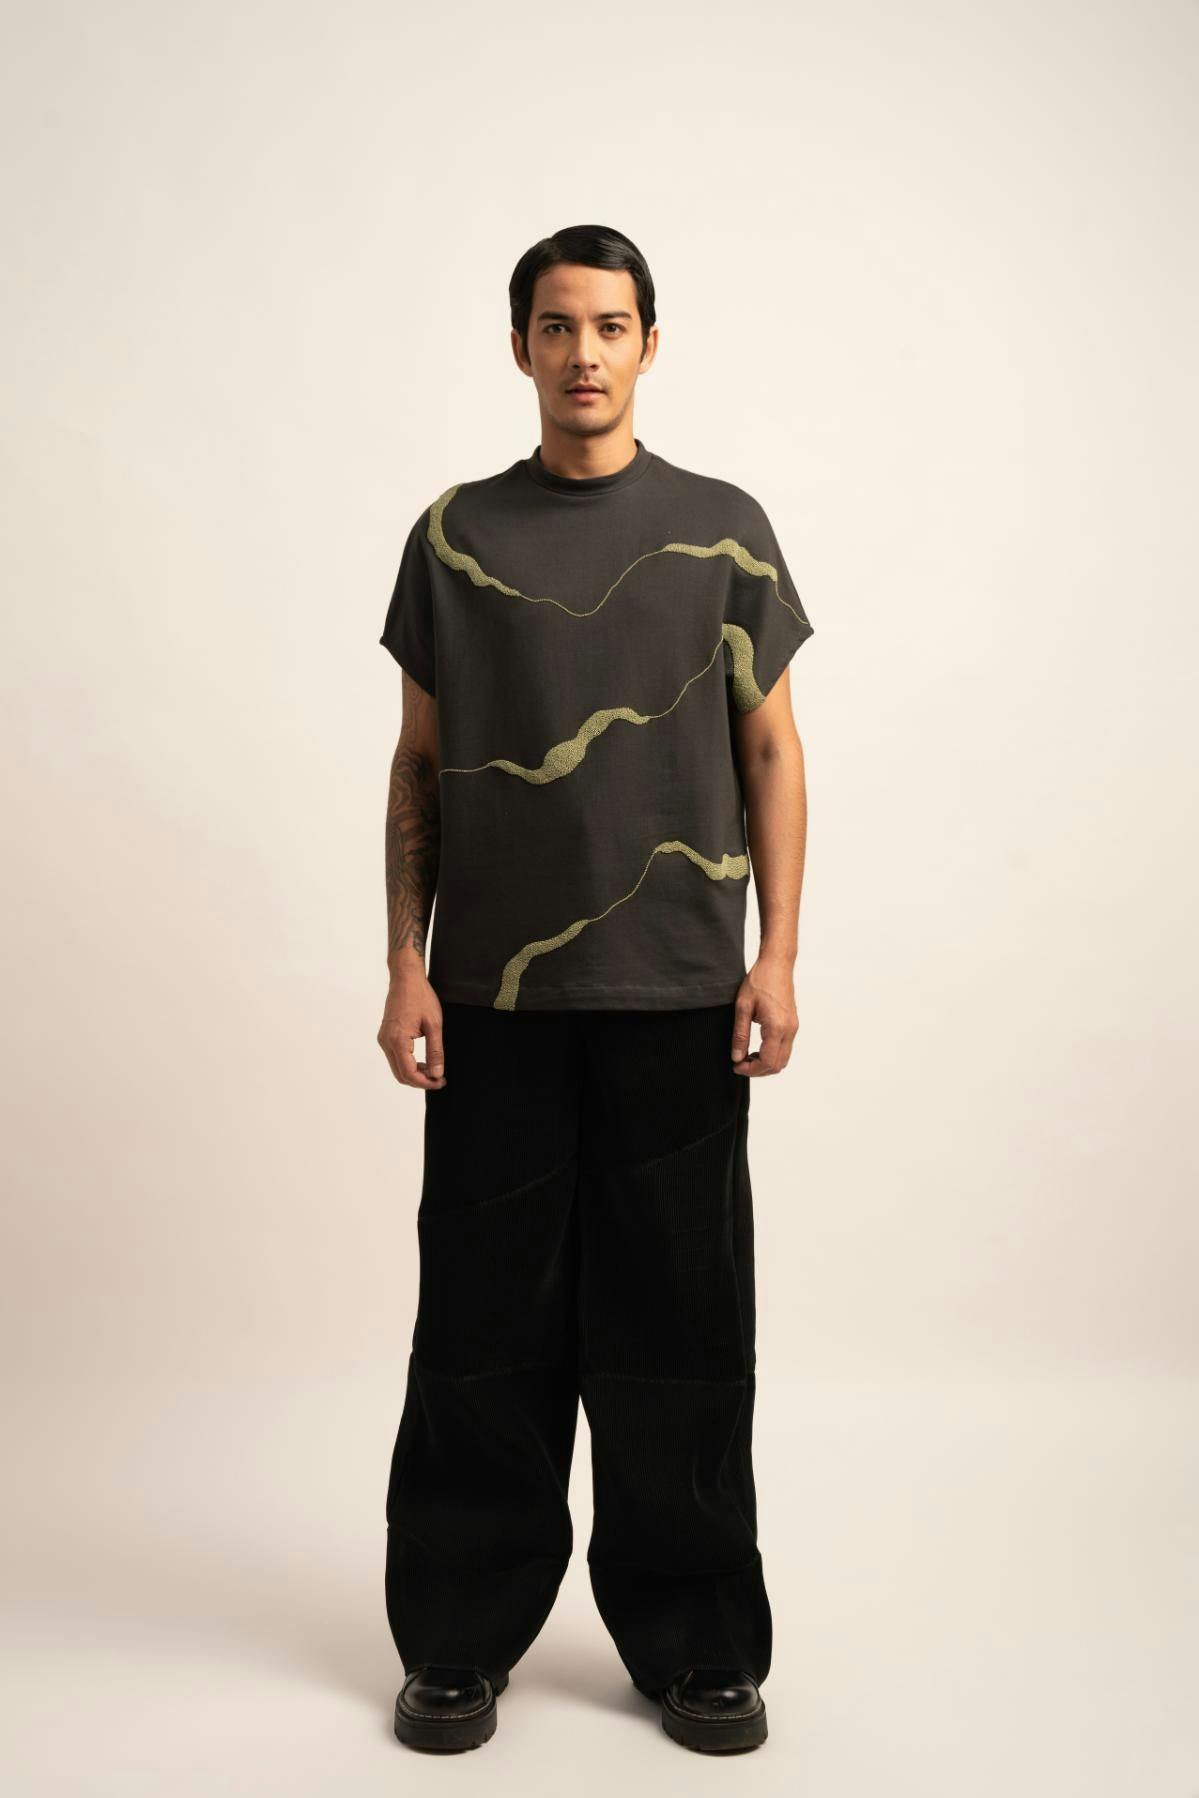 The Luxe Splendor Beaded T-Shirt, a product by Siddhant Agrawal Label